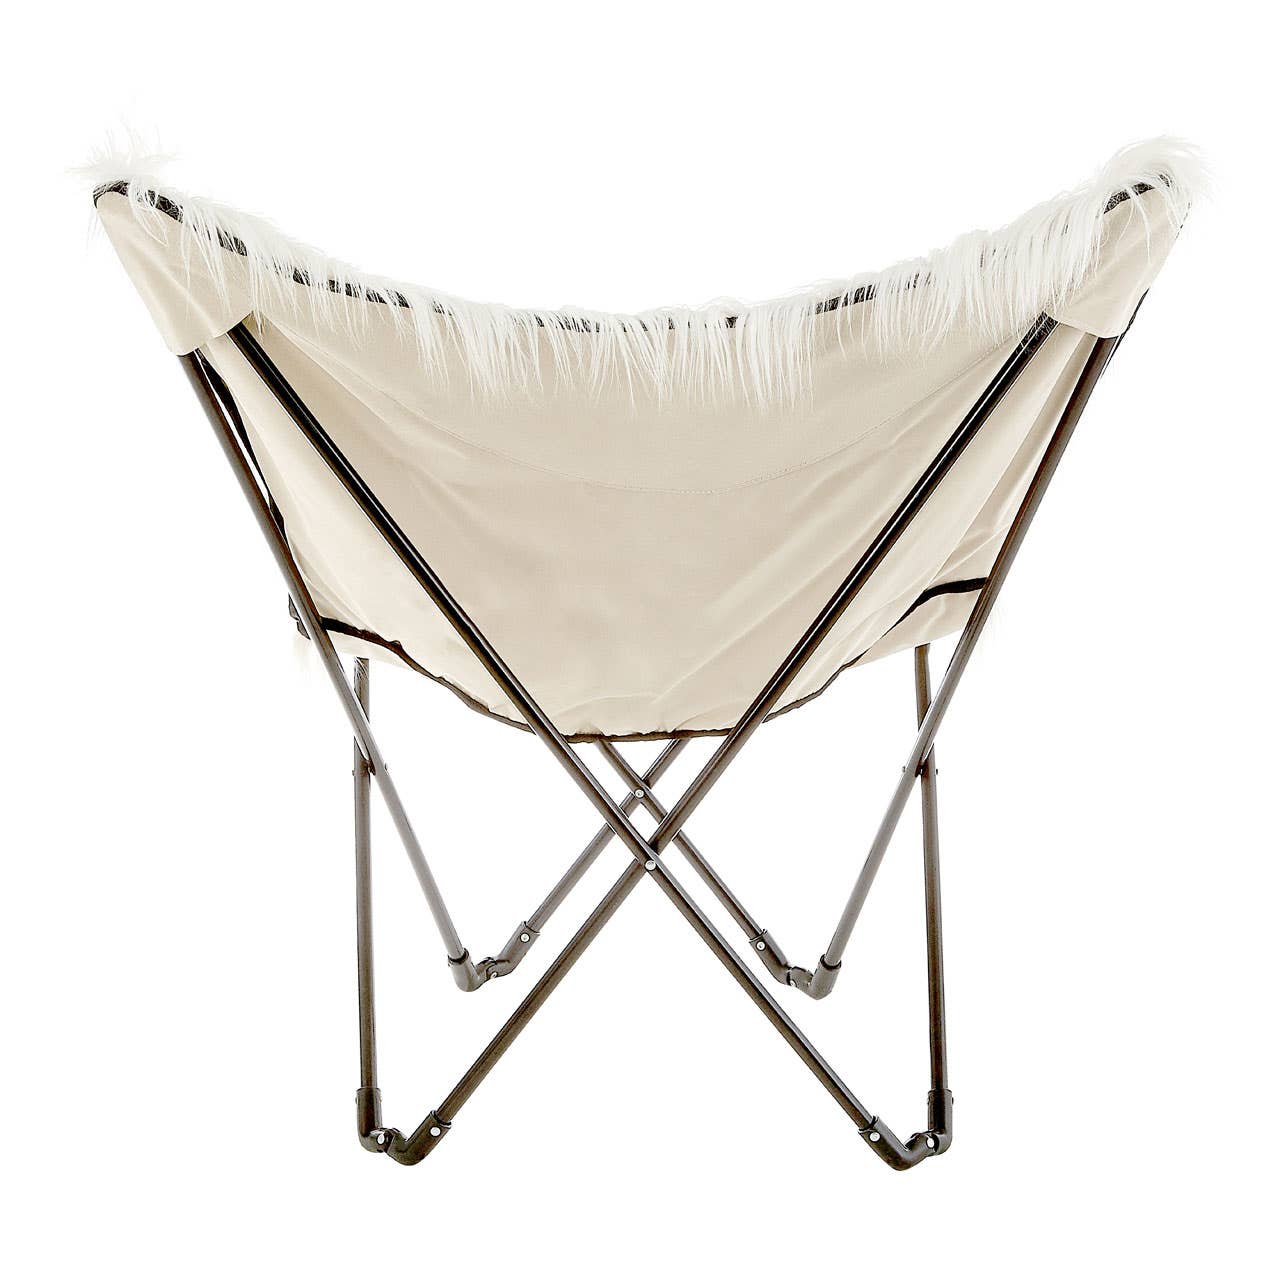 Noosa & Co. Living Sienna White Faux Fur Butterfly Chair House of Isabella UK